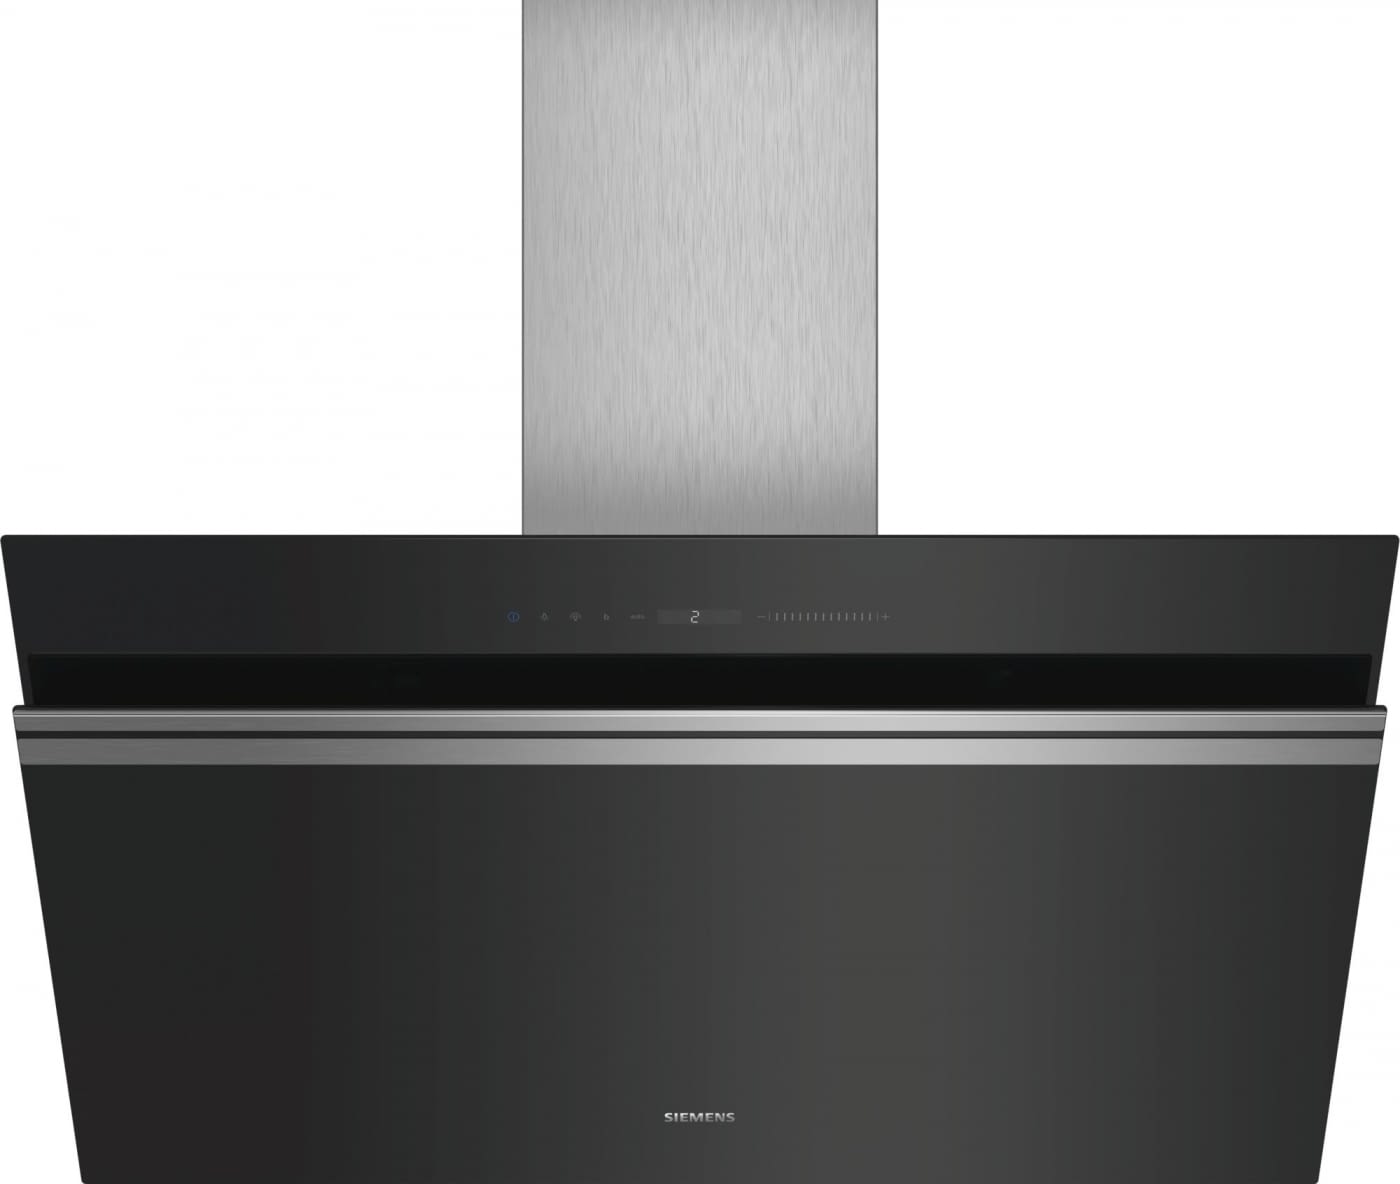 Campana Siemens Lc91kww60 90 cm decorativa 950 m³h home connect led negro 890 pared clase cristal 90cm iq500 color blanco extractora vertical inclinada m3h wallmounted cooker hood 5 9 525 89 iq700